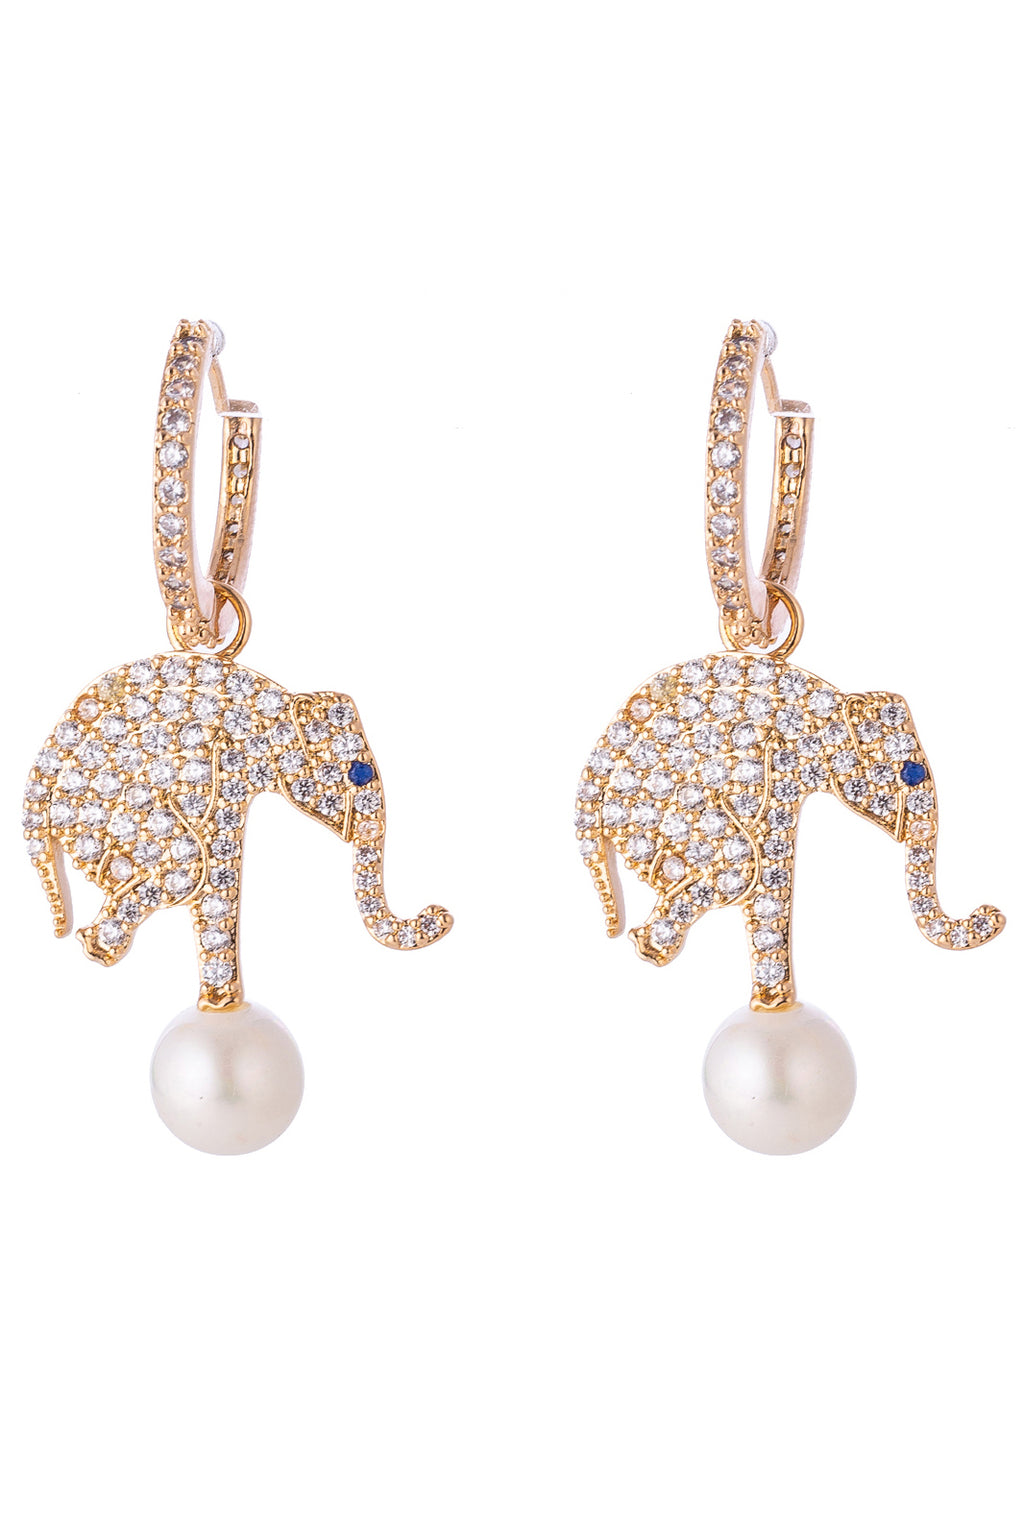 Gold hoop elephant earrings studded with CZ crystals.